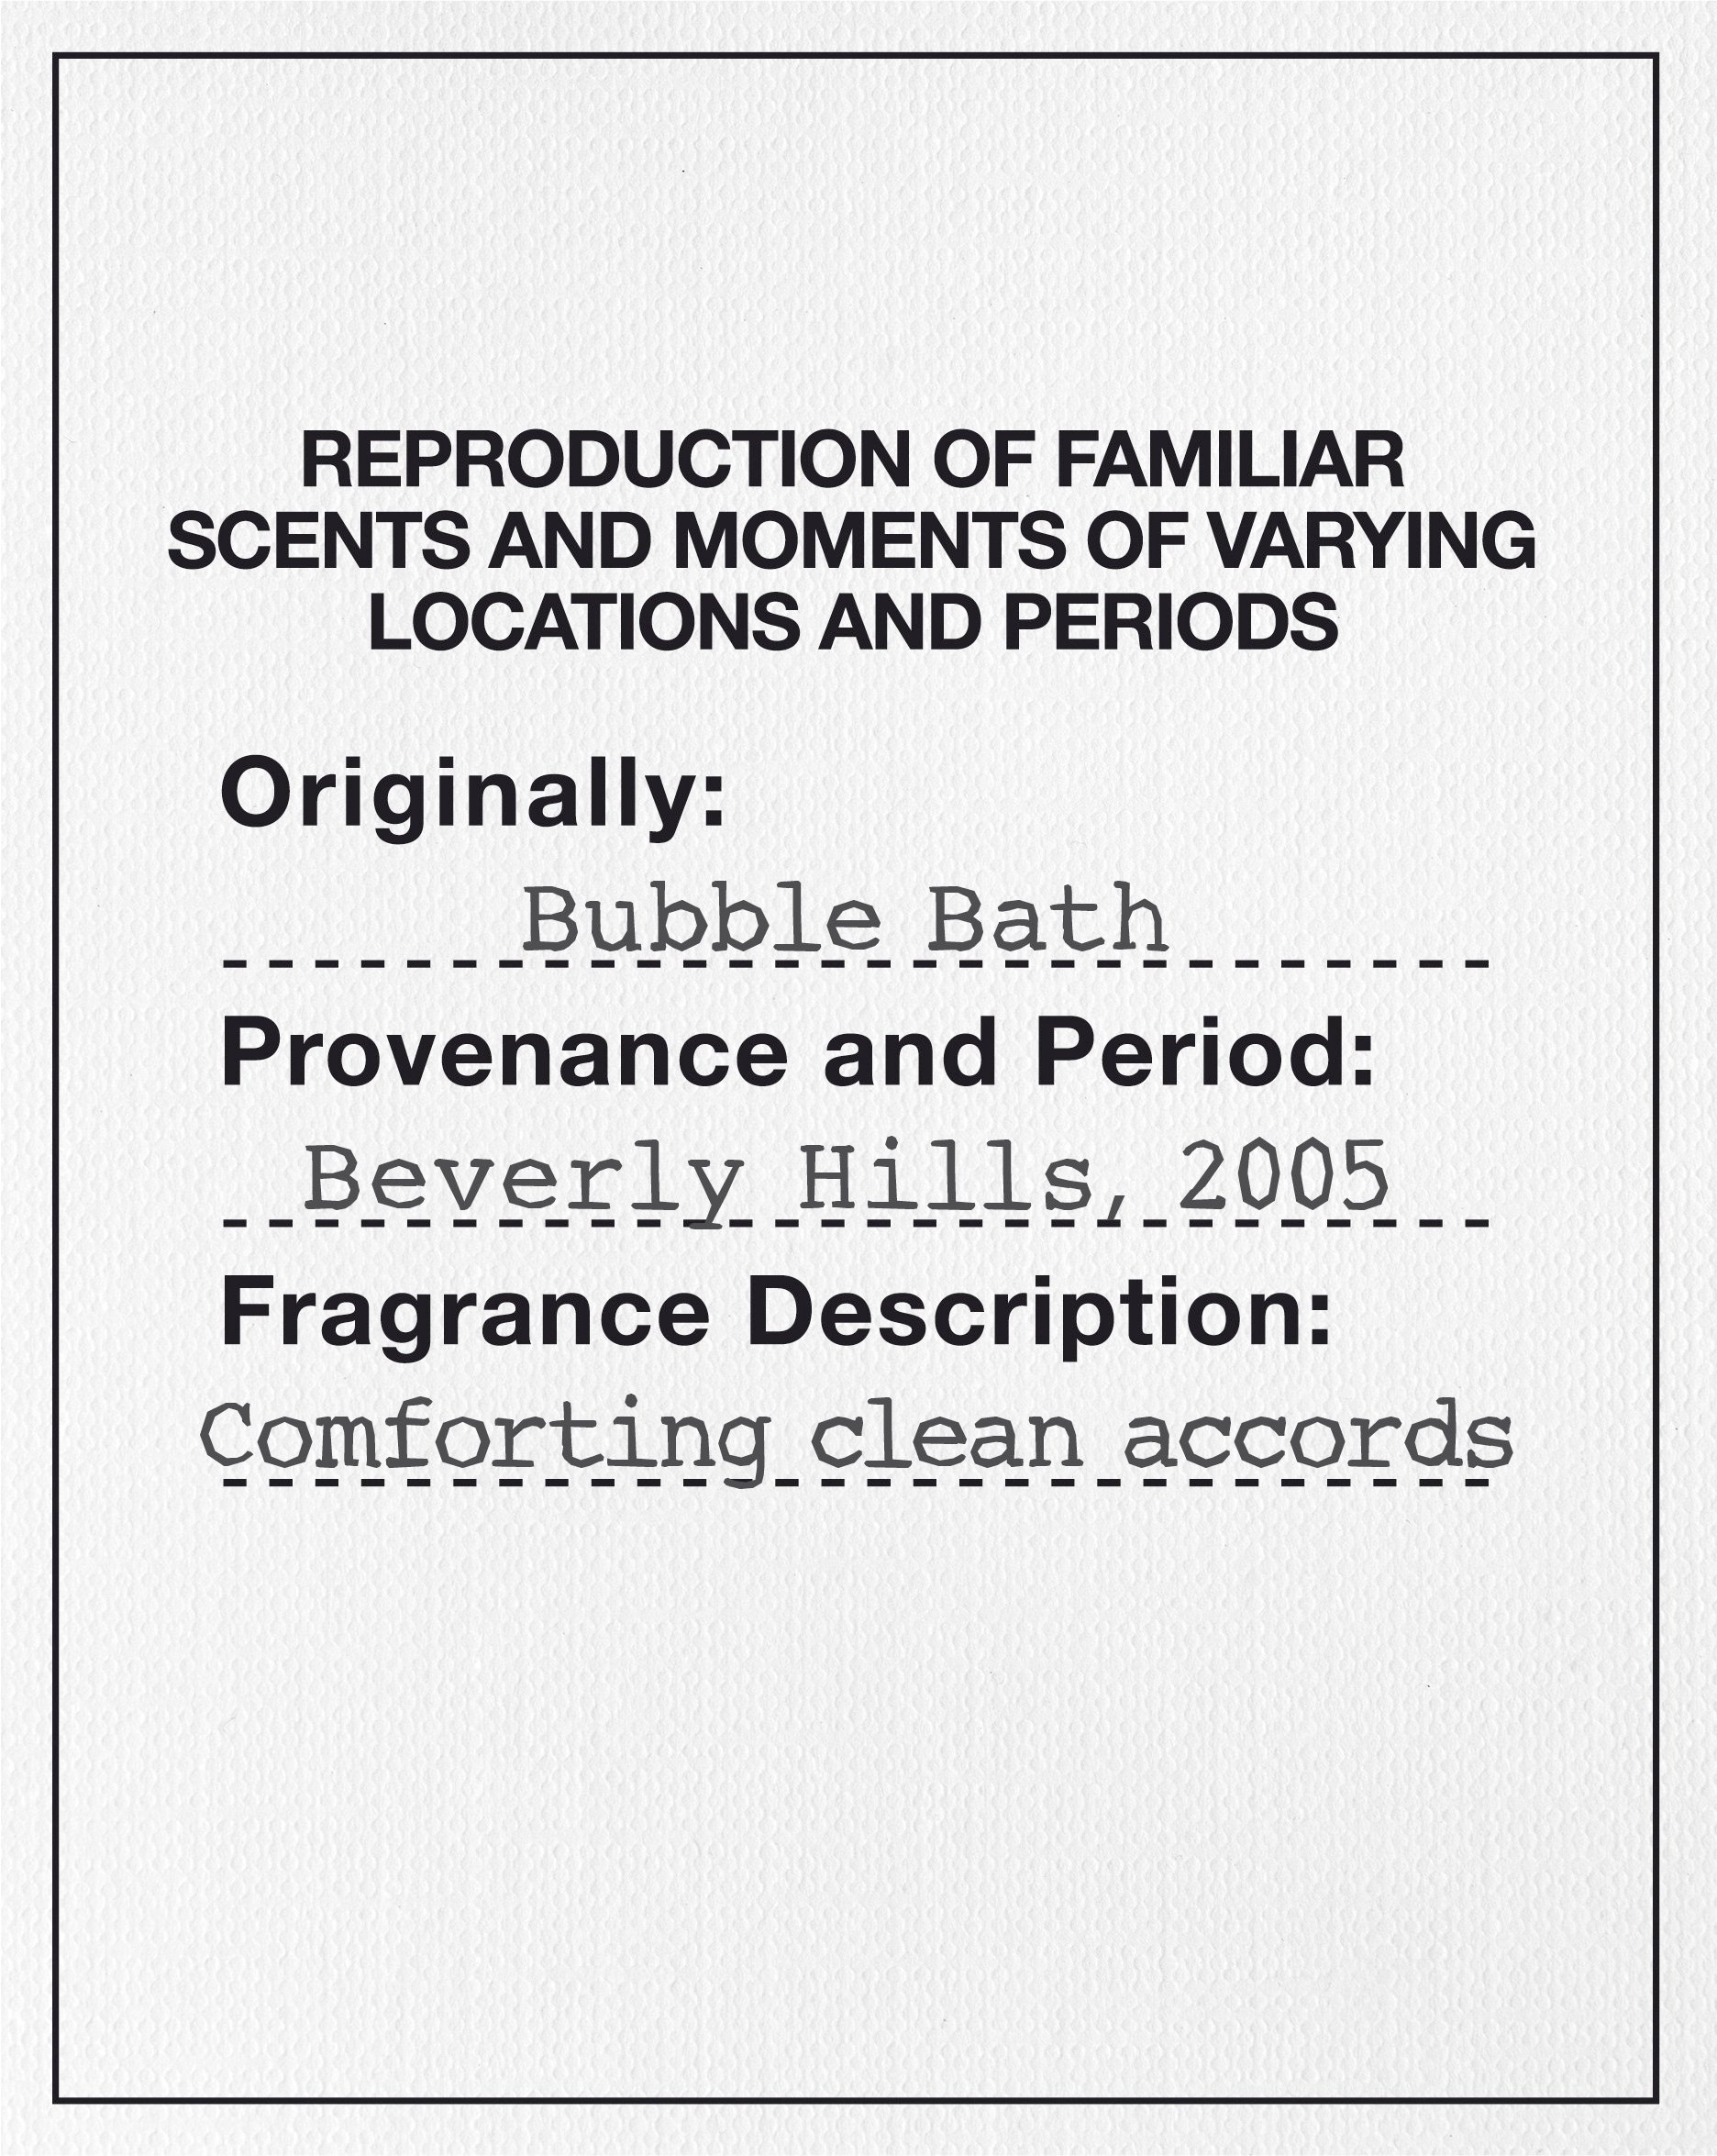  REPRODUCTION OF FAMILIAR SCENTS AND MOMENTS OF VARYING LOCATIONS AND PERIODS ORIGINALLY: BUBBLE BATH PROVENANCE AND PERIOD: BEVE